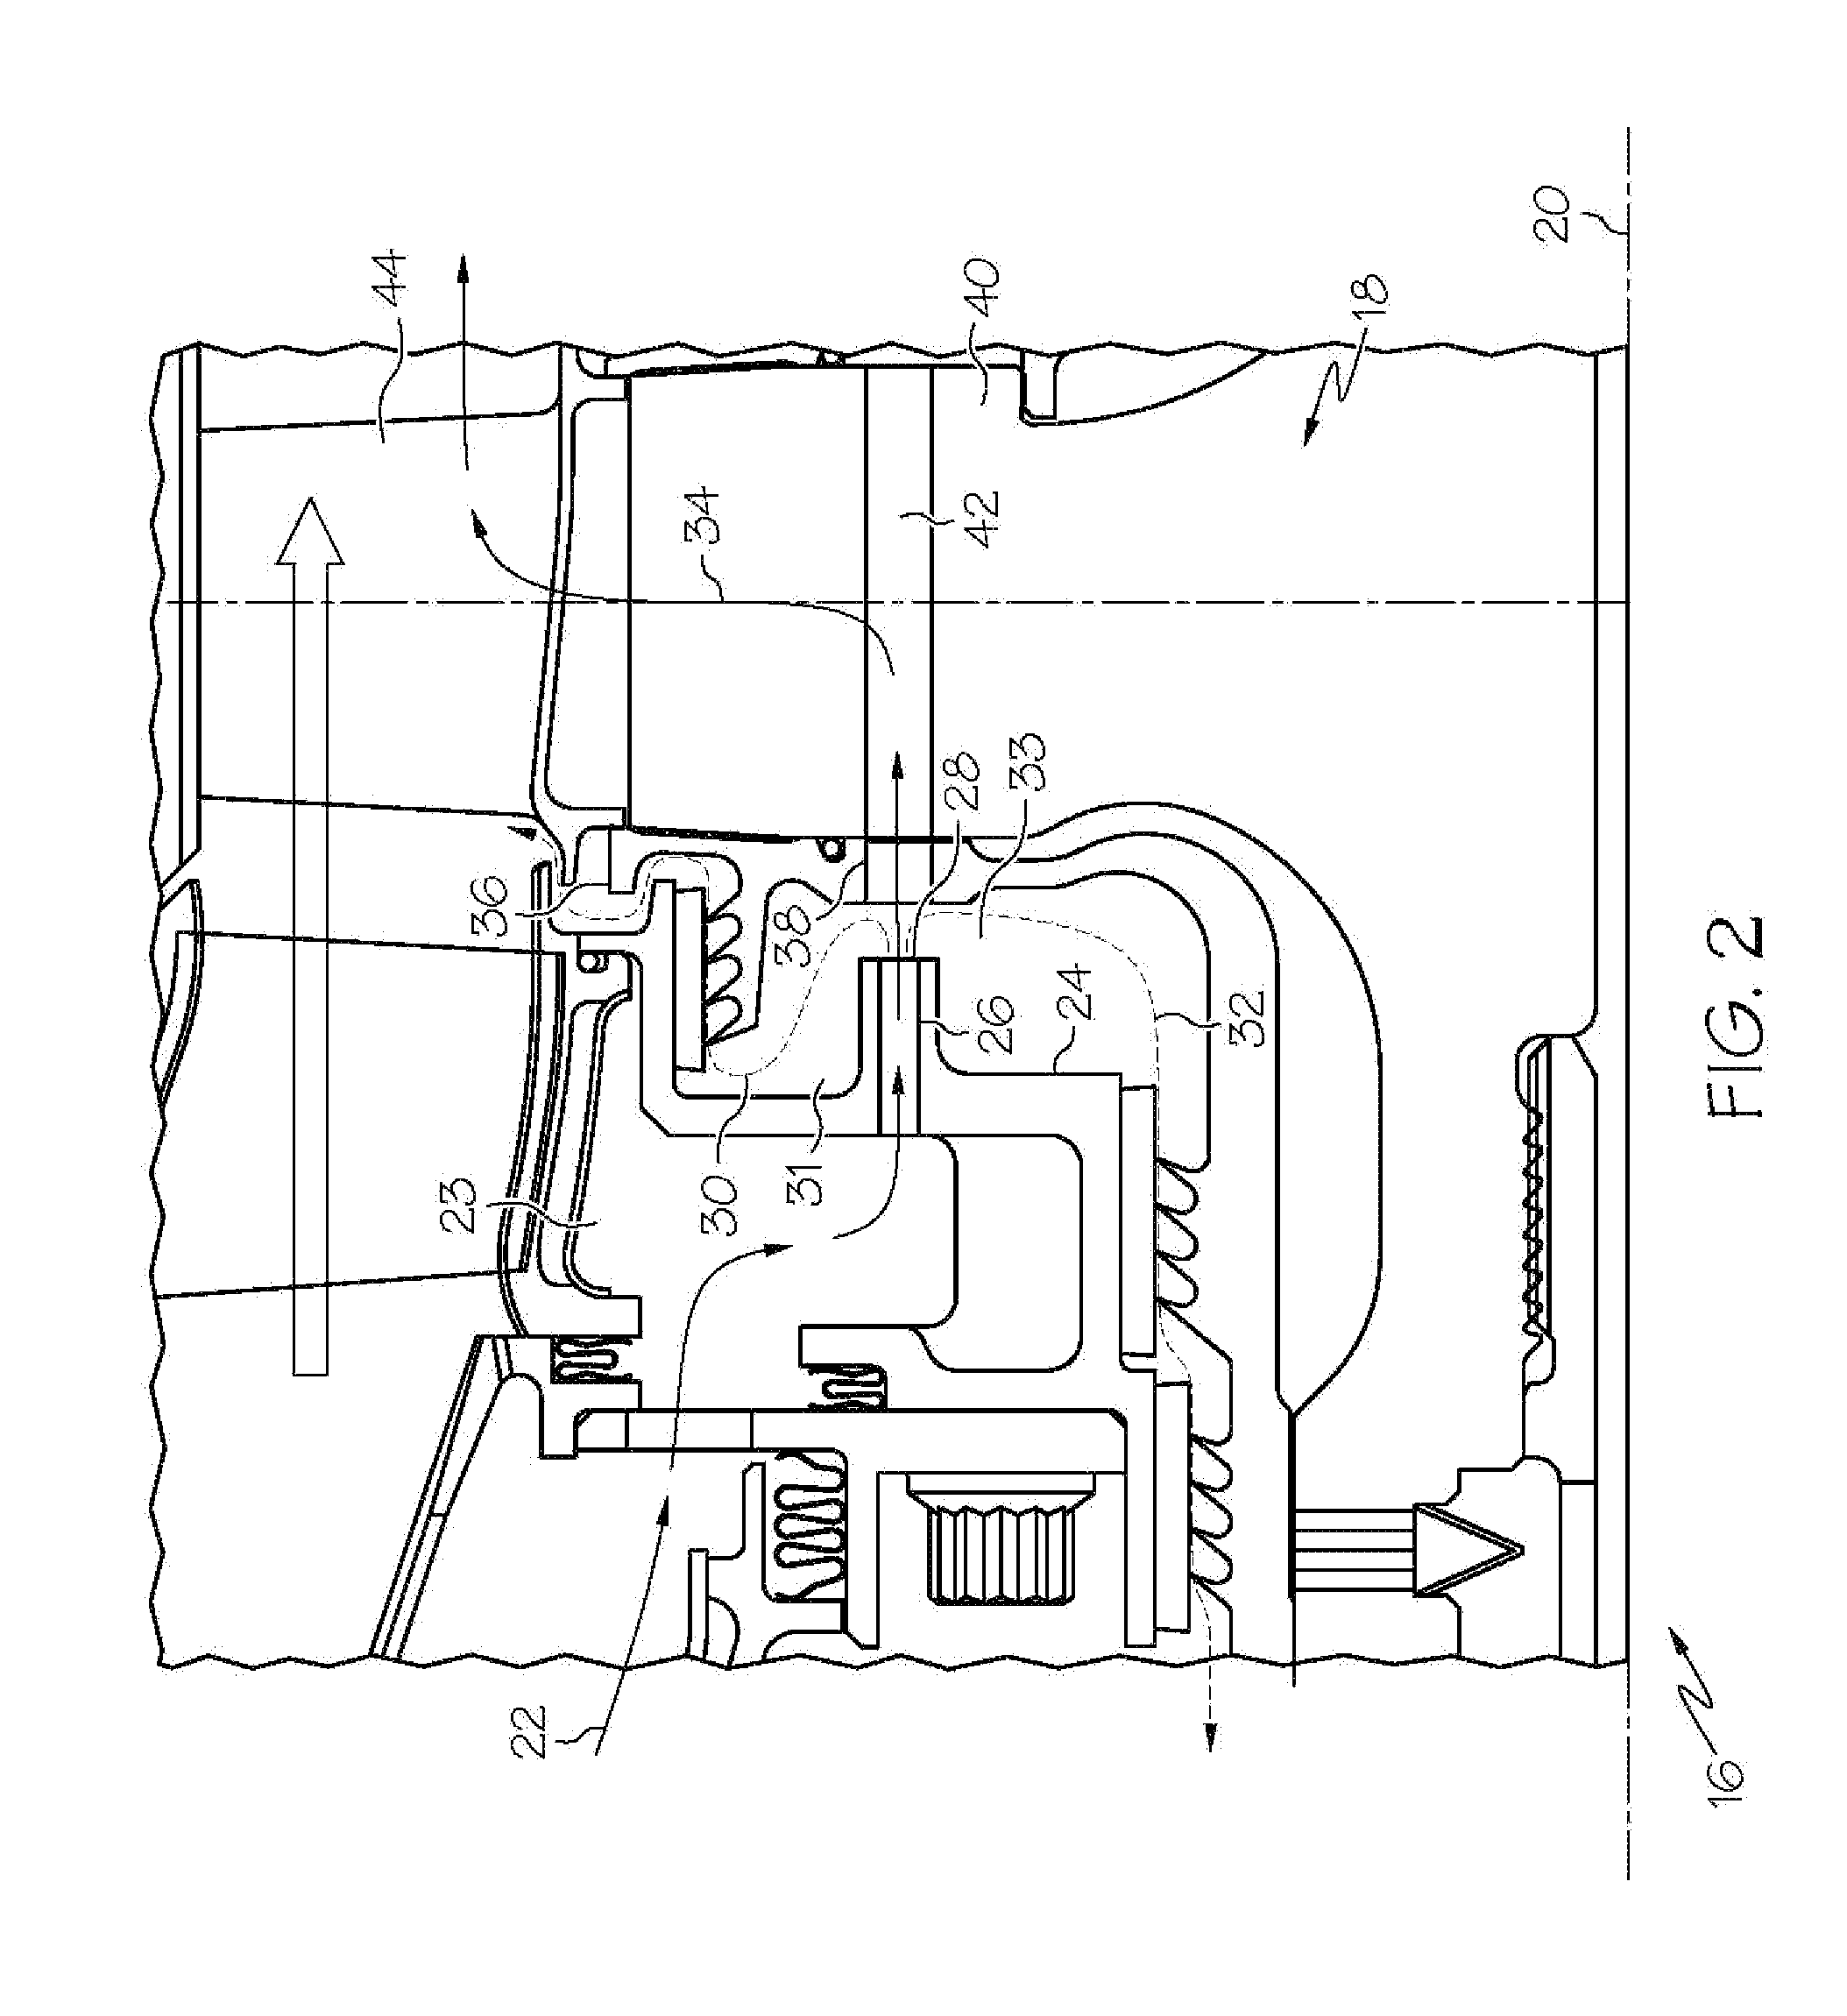 Direct transfer axial tangential onboard injector system (TOBI) with self-supporting seal plate